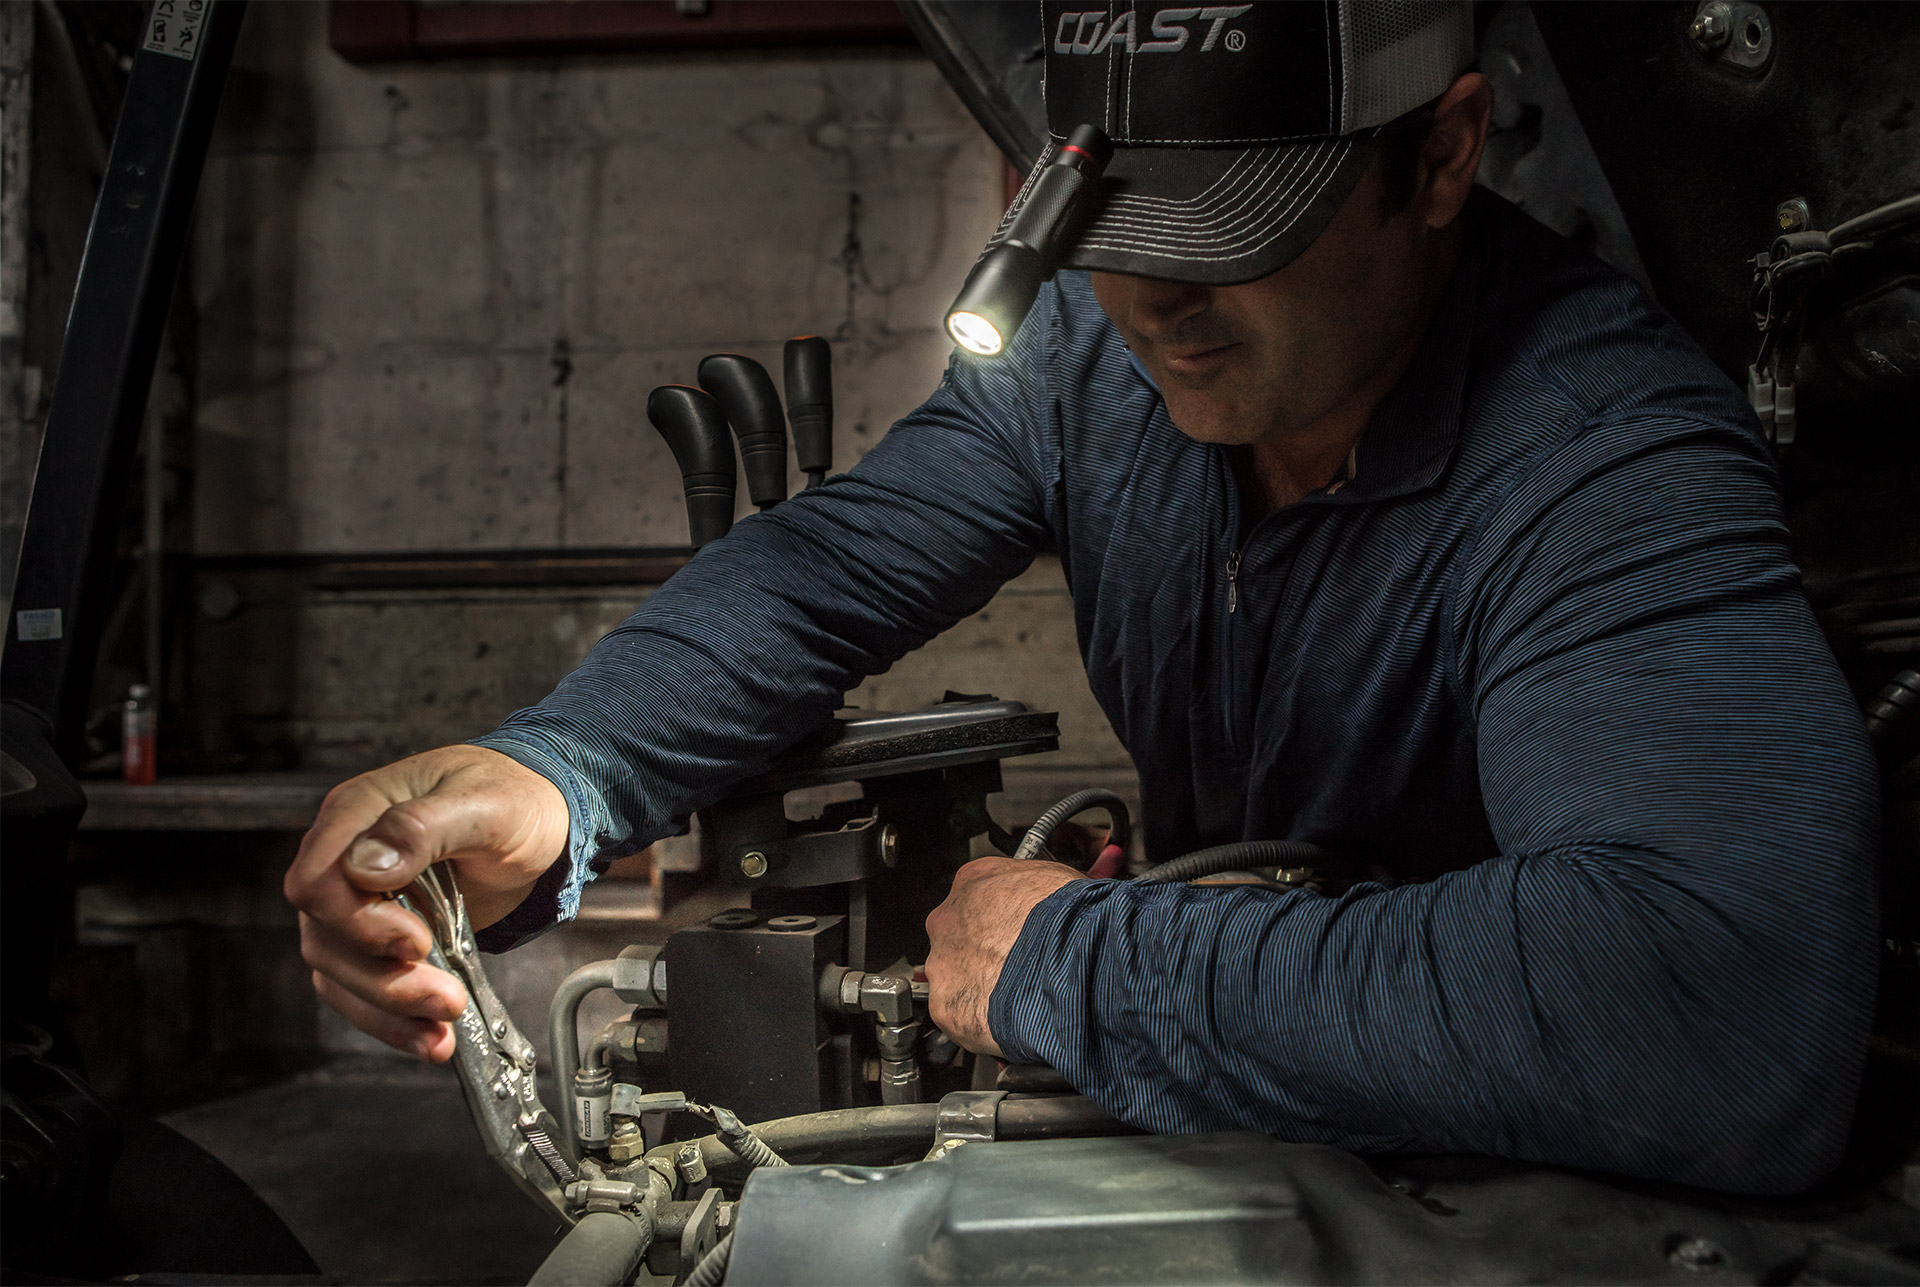 Man working on machinery with Coast Products flashlight on cap